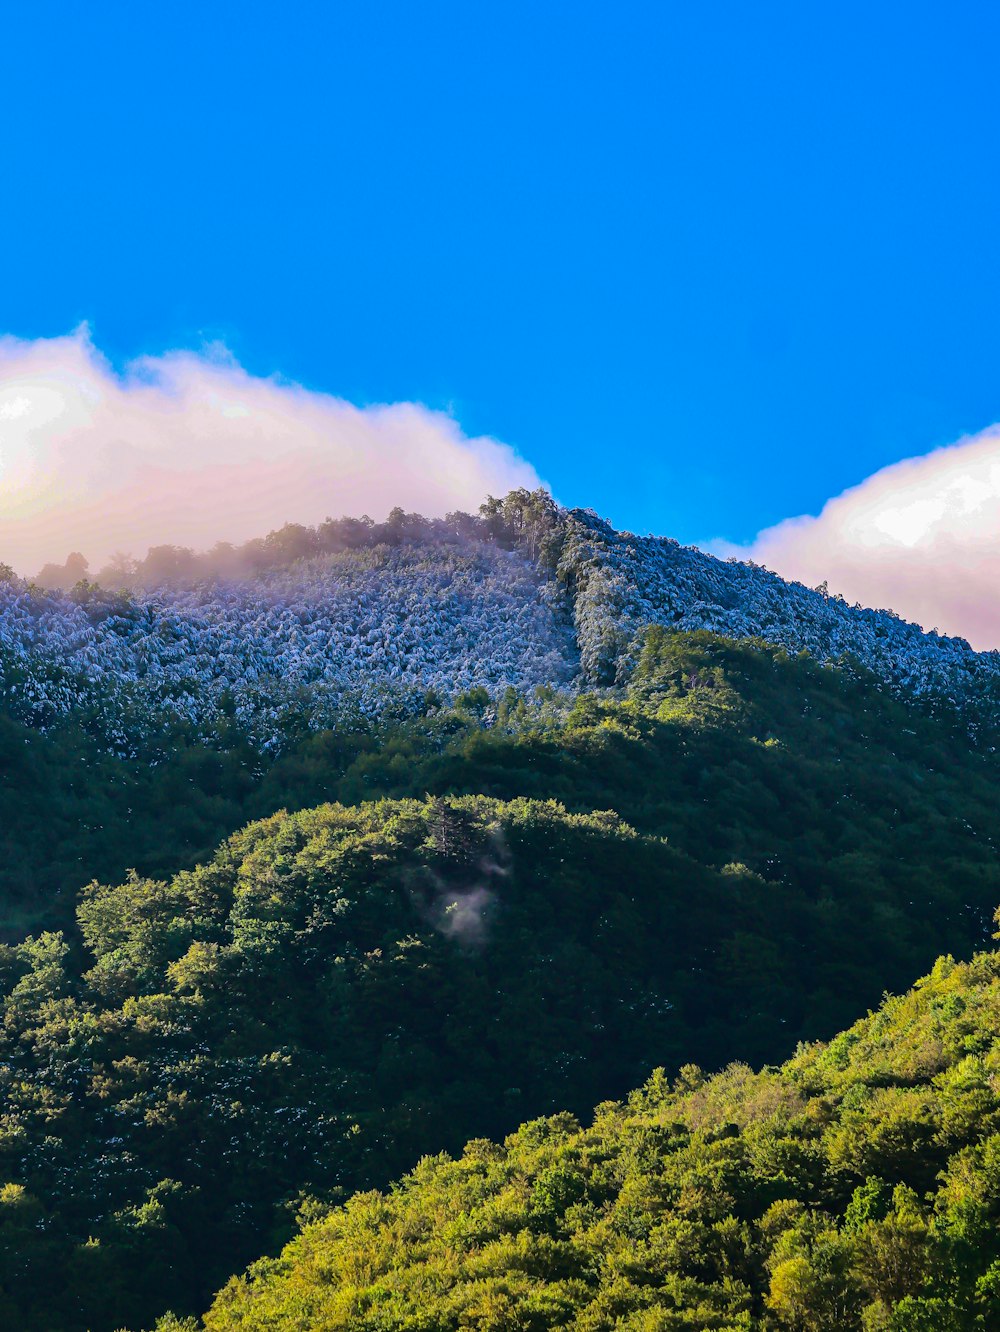 a mountain covered in trees and clouds with a blue sky